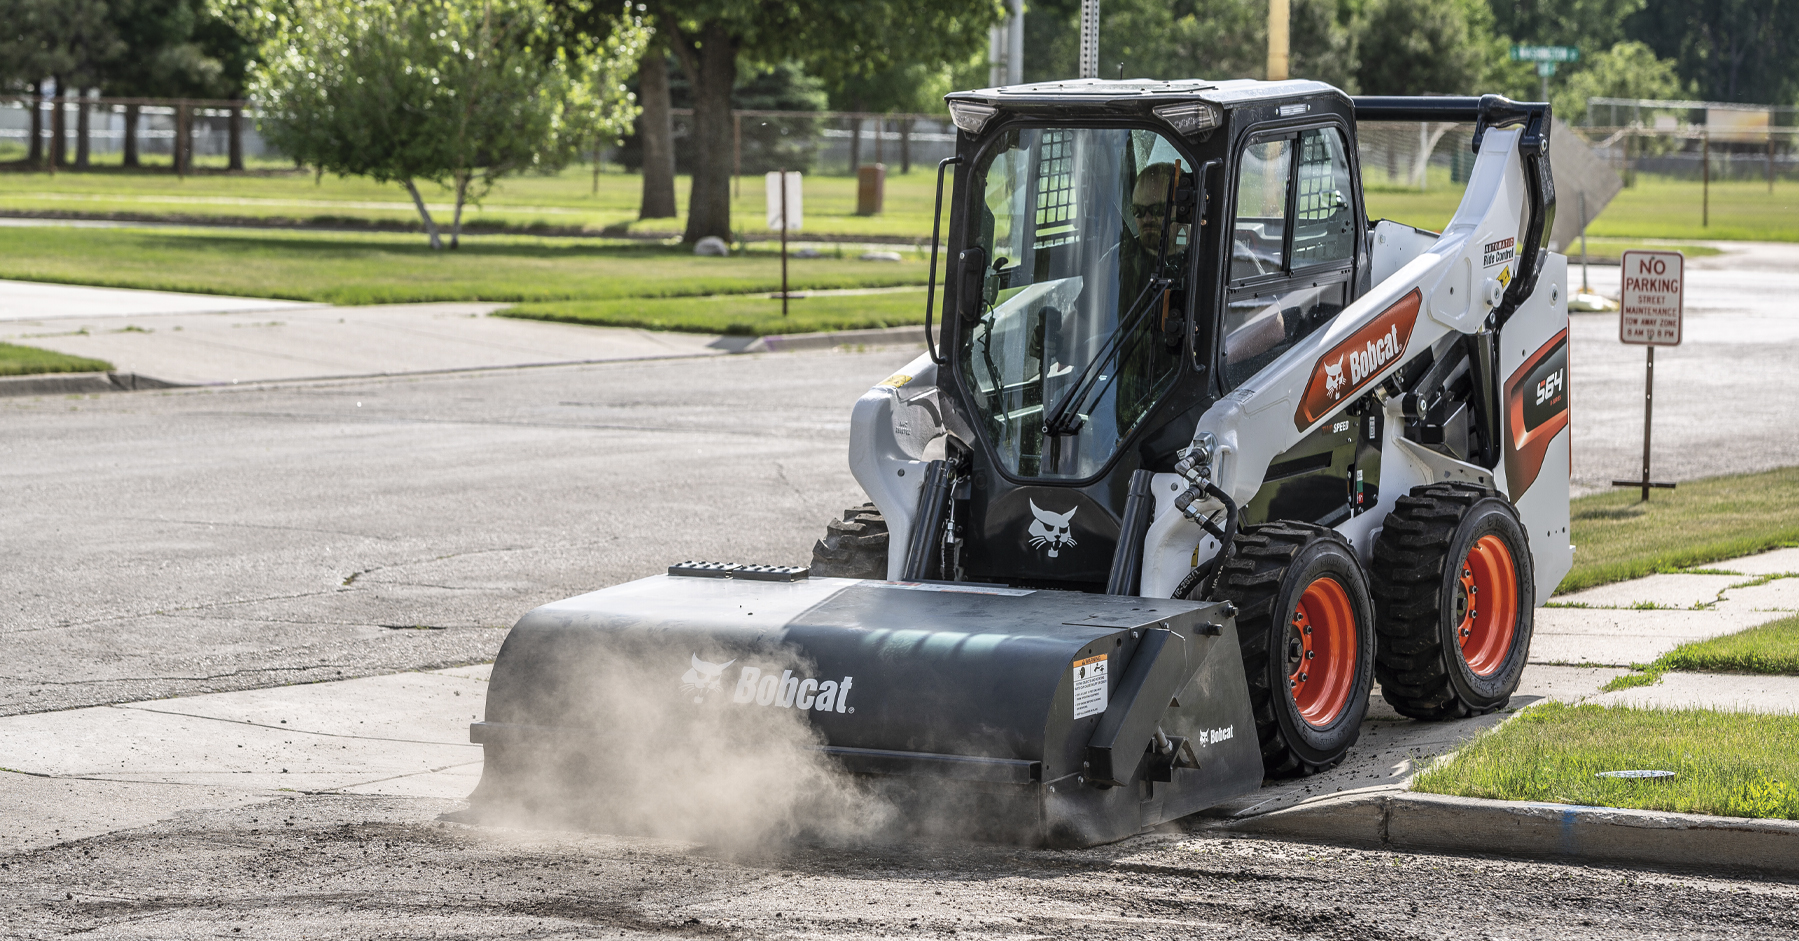 How to Get Your Bobcat Equipment Ready for Summer